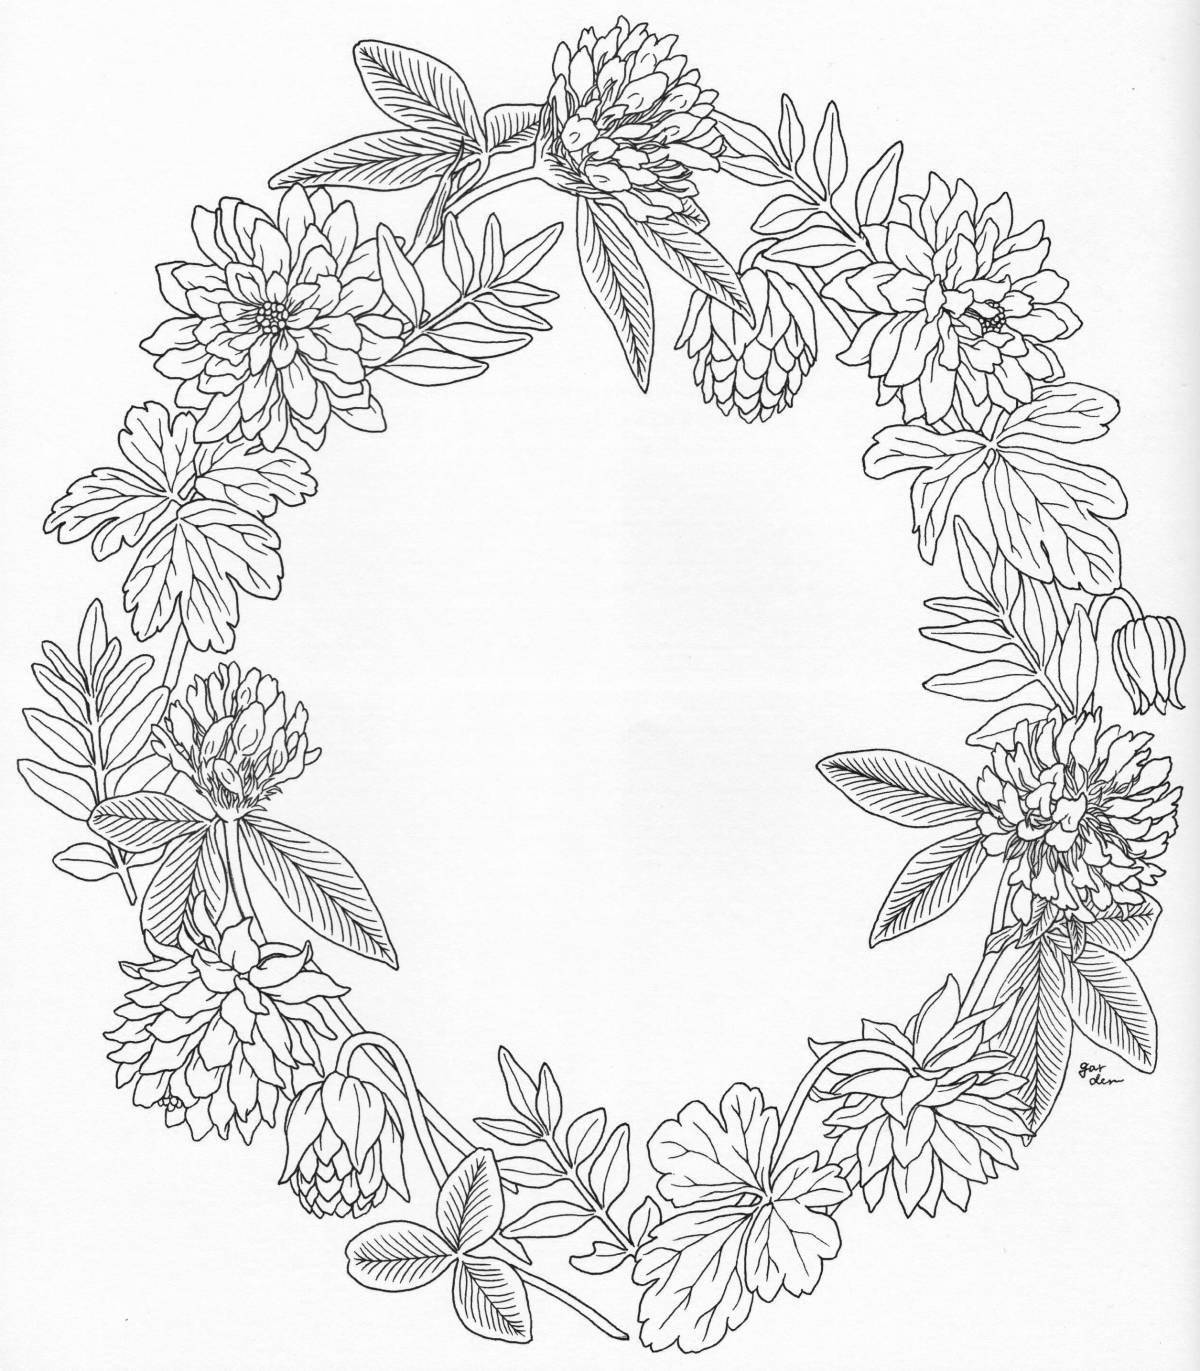 Coloring wreath of flowers